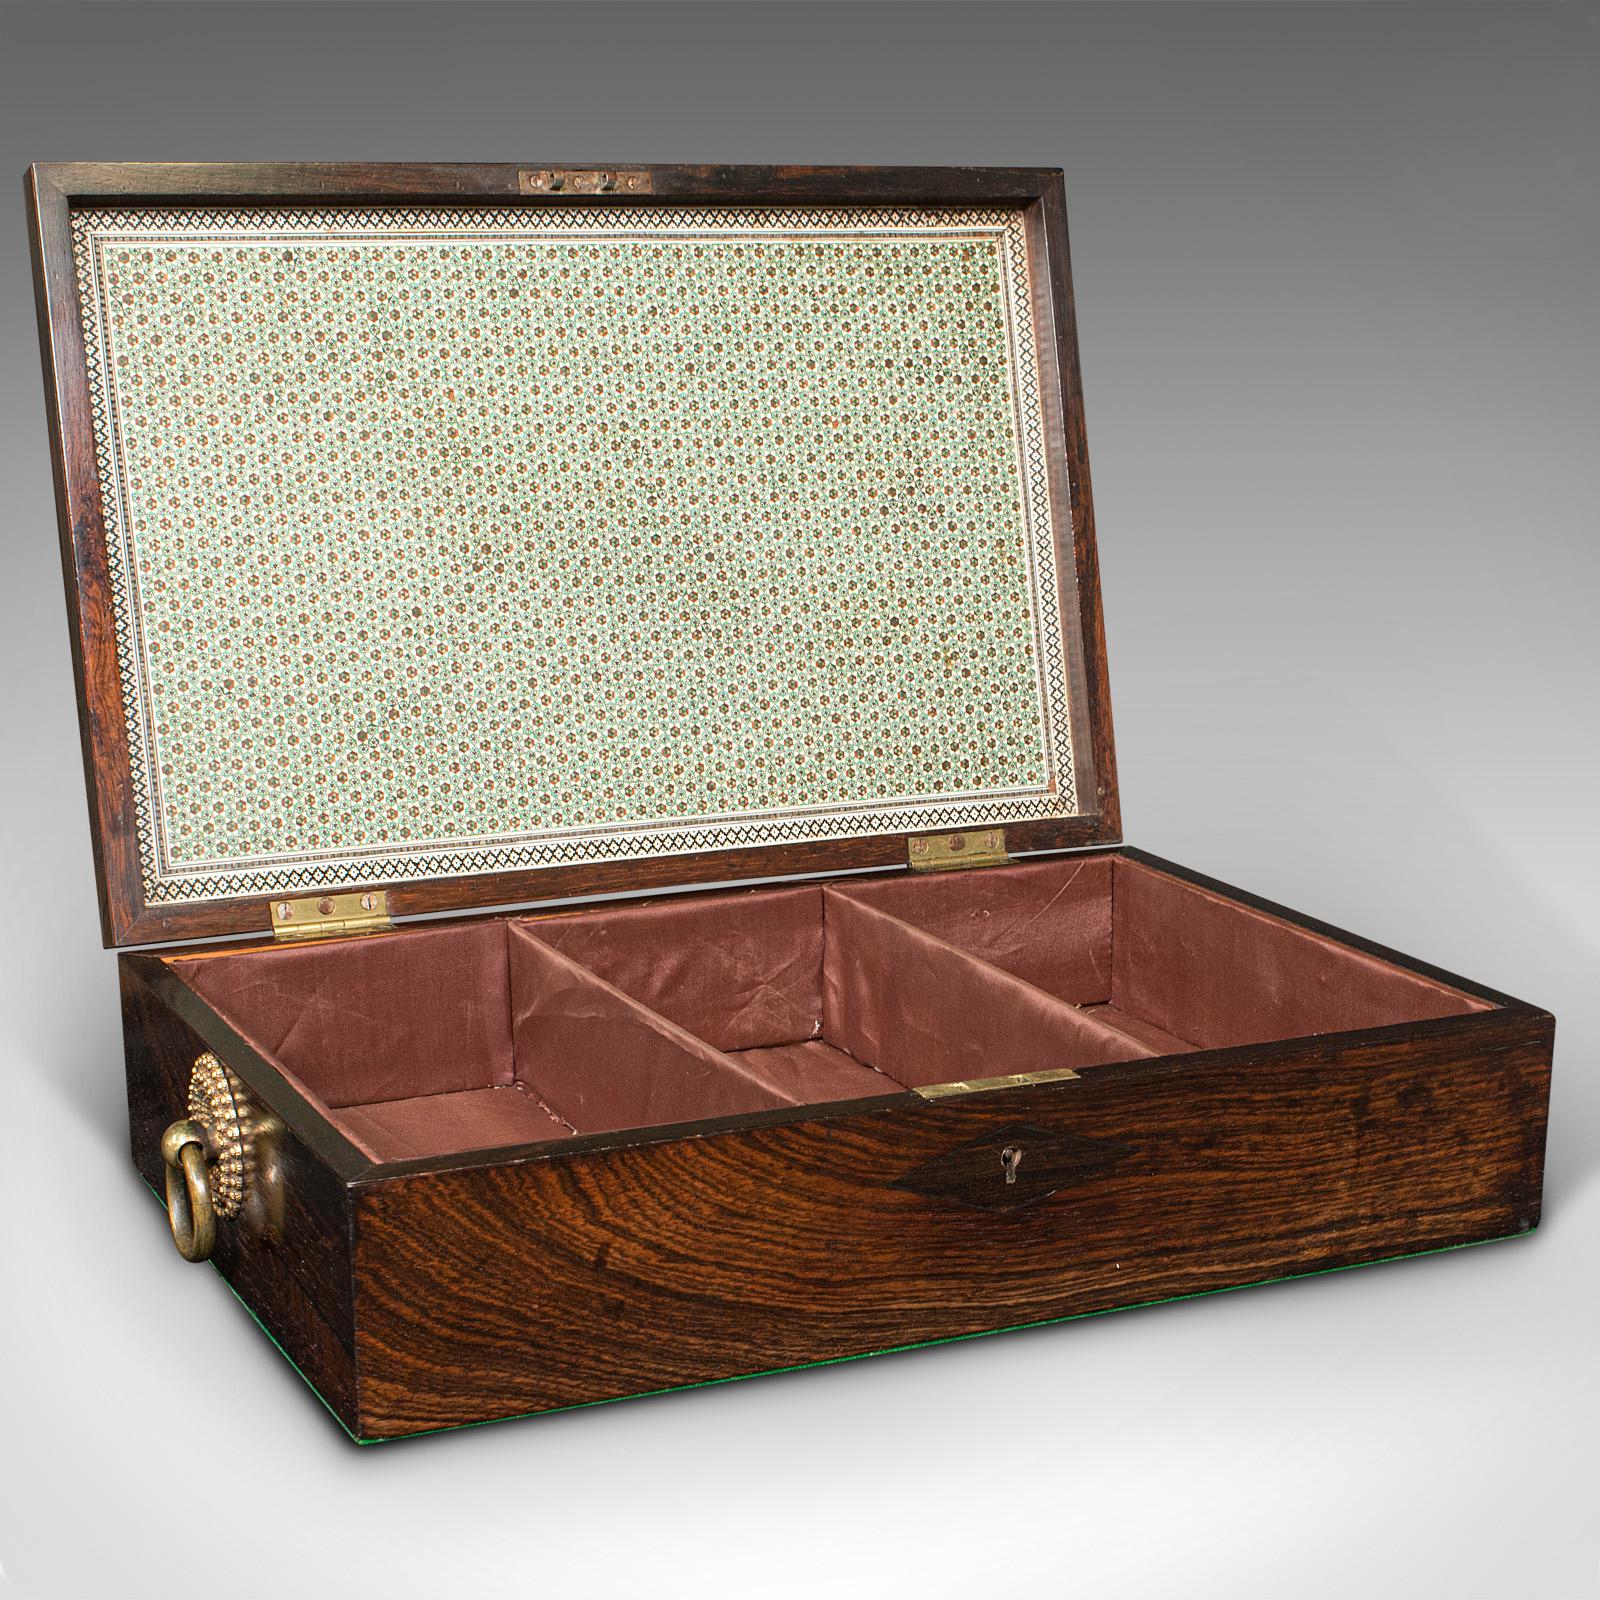 This is an antique campaign correspondence box. An Indian, rosewood and Sadeli mosaic colonial writing case, dating to the Regency period, circa 1820.

Delightfully attractive box, with copious details and quality finishes
Displaying a desirable